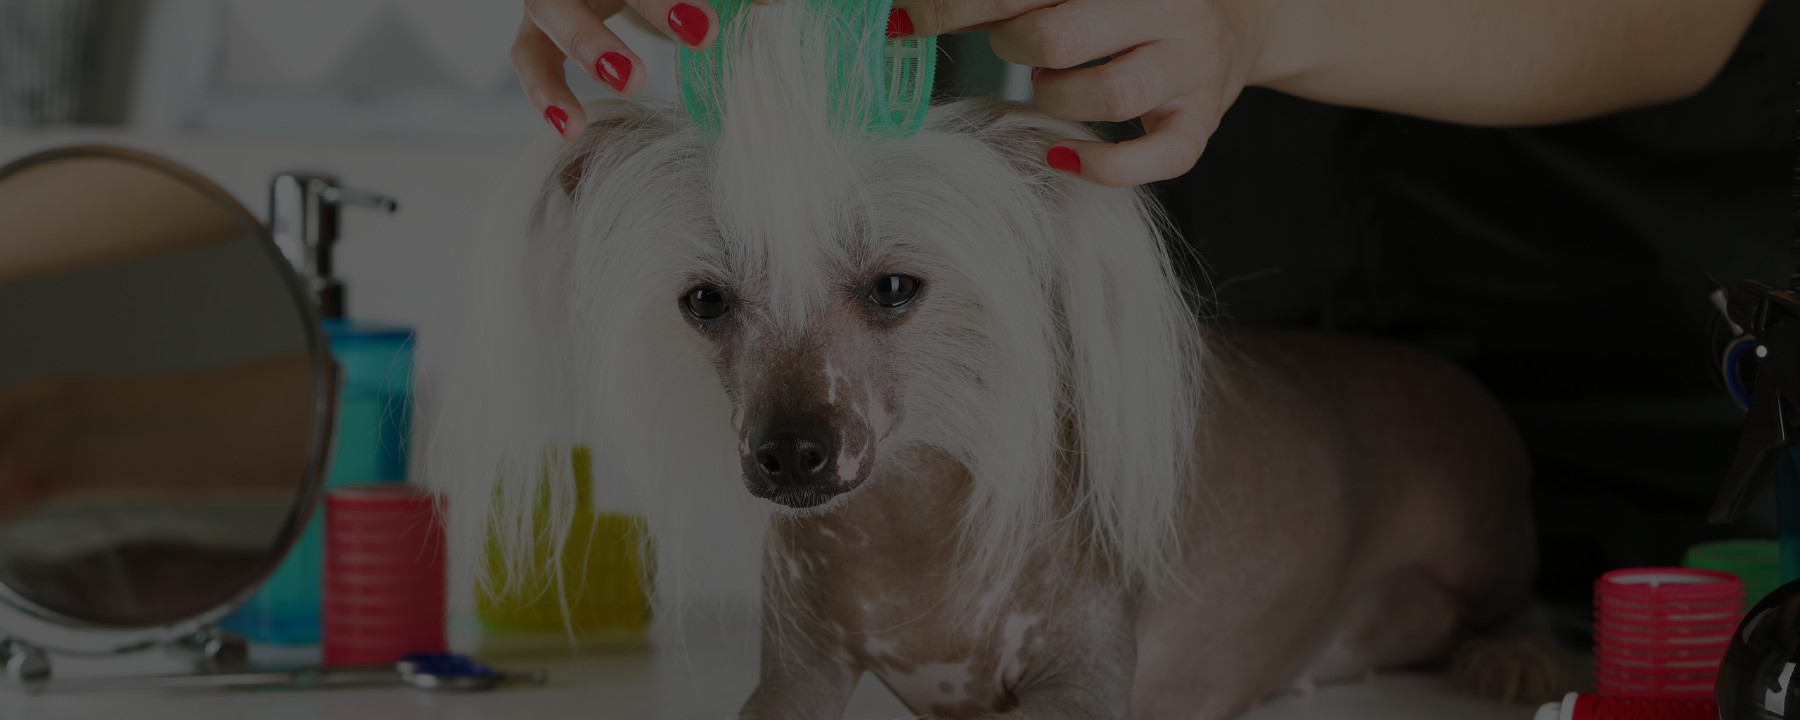 Your Dog Grooming Business: Salon vs. Home Grooming